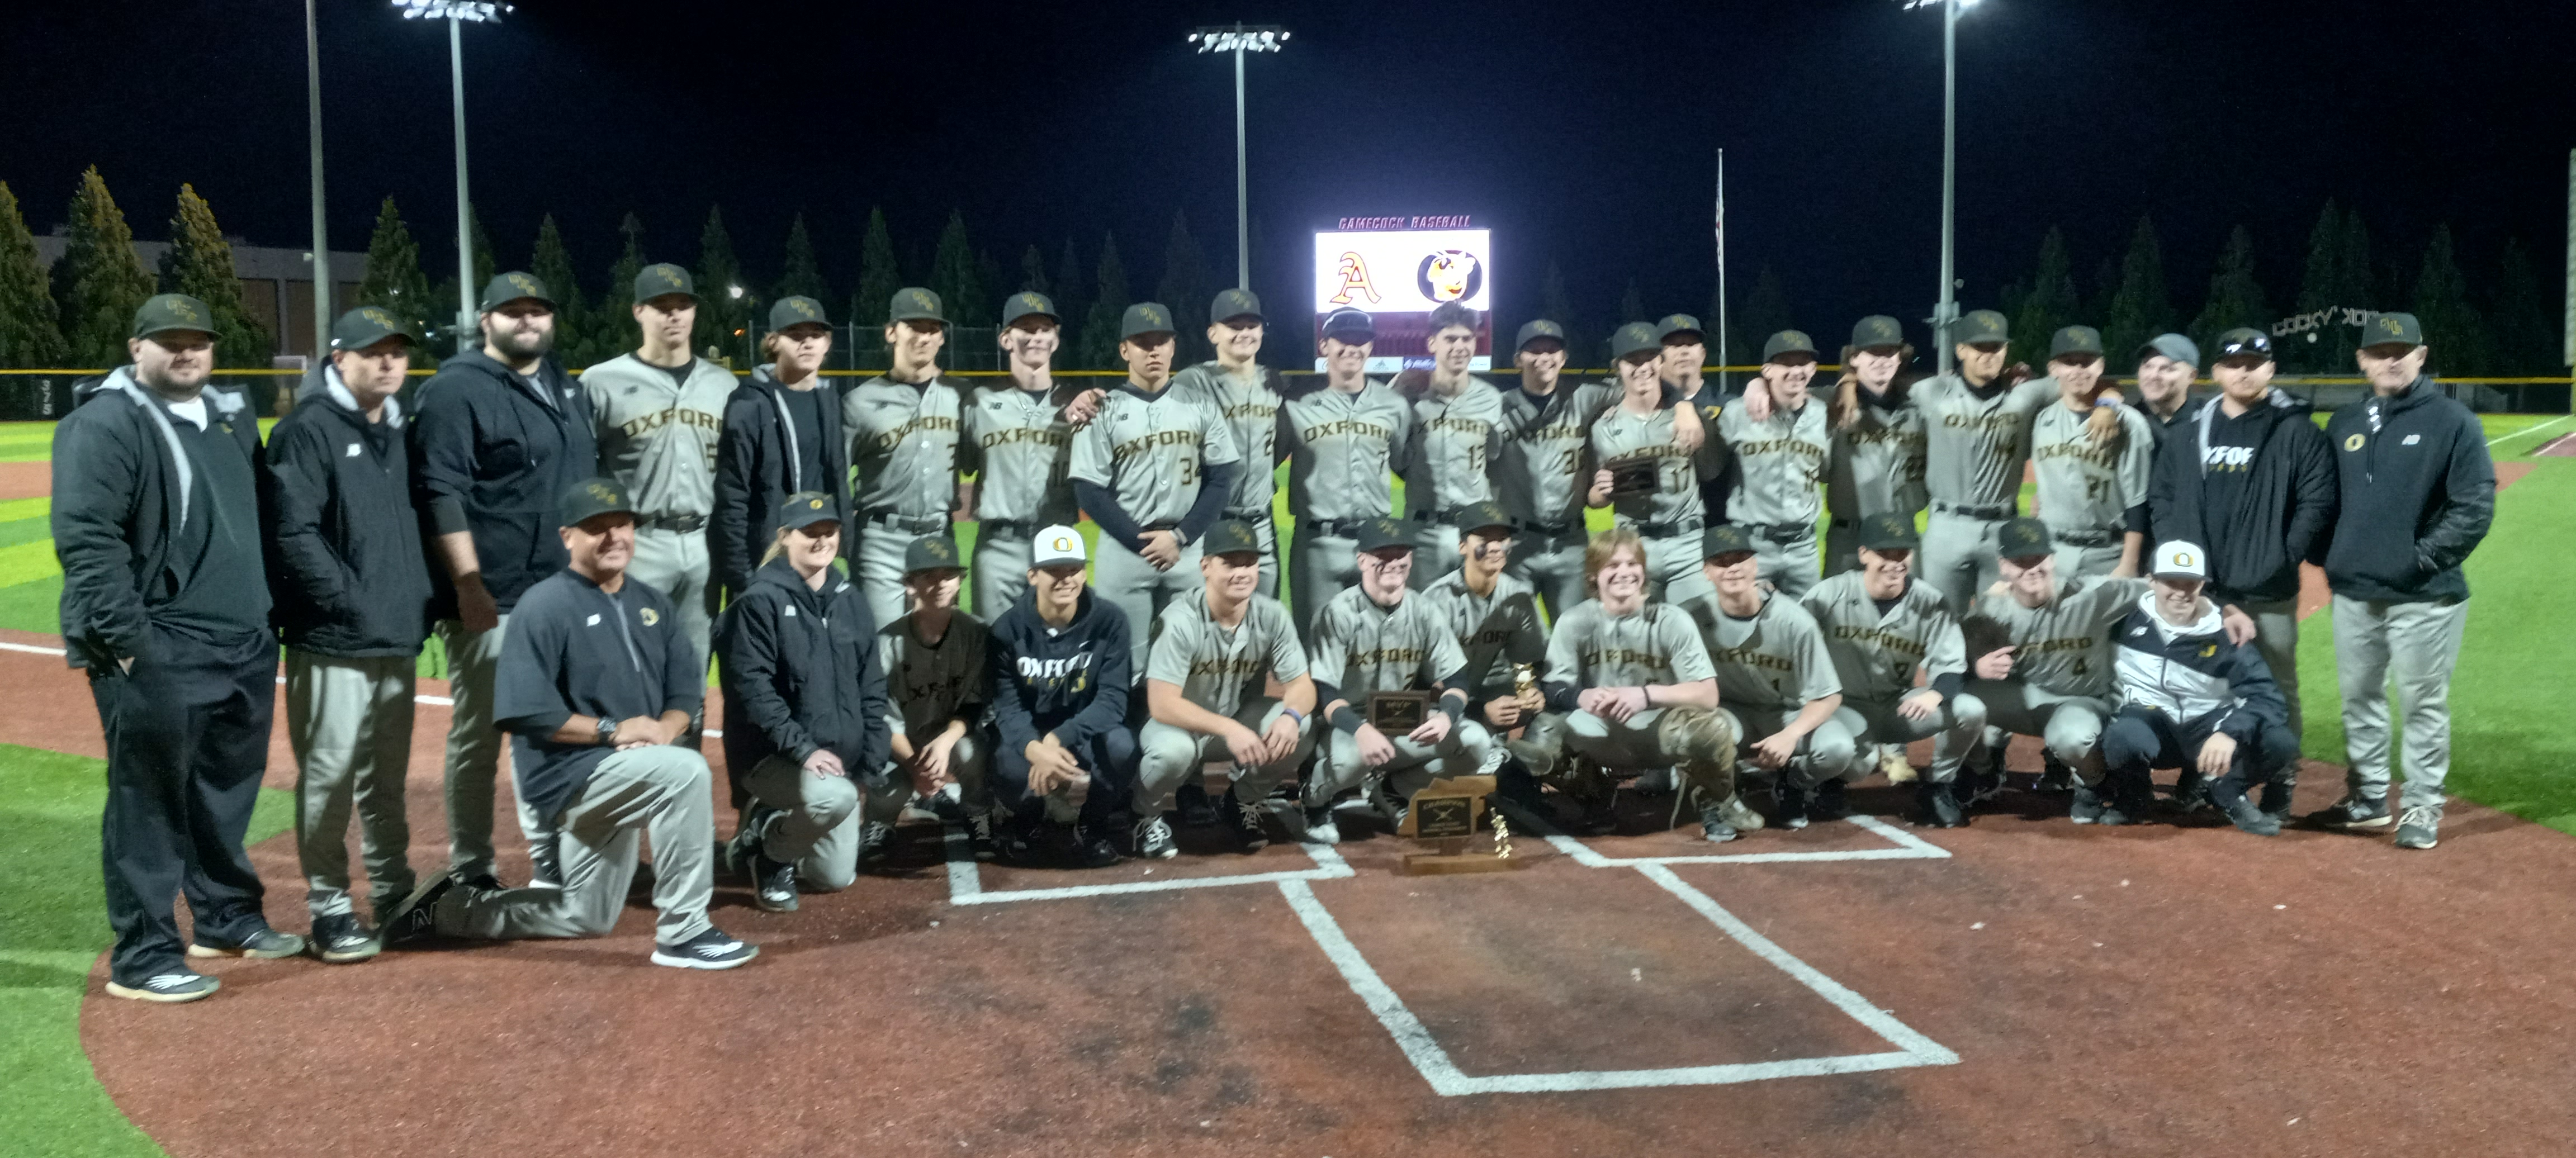 Oxford players and coaches pose with the trophy after winning the Calhoun County final Wednesday on Rudy Abbott Field. (Photo by Joe Medley)